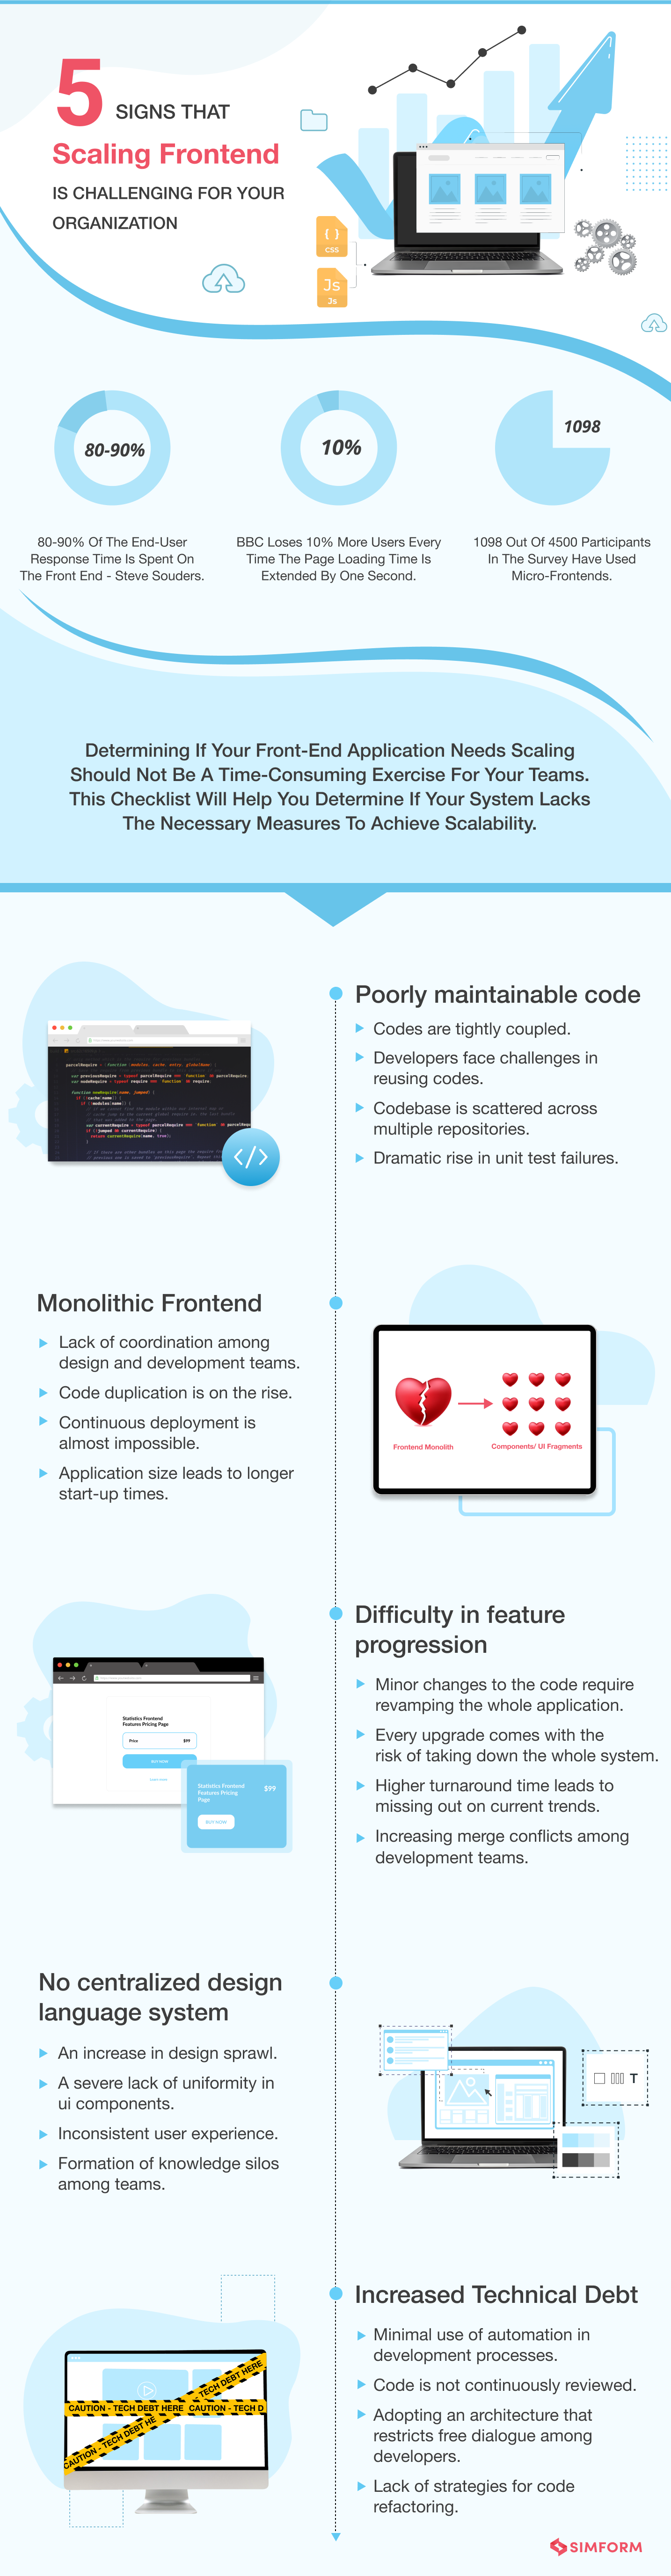 Scaling-Frontend-Challenge-Infographic